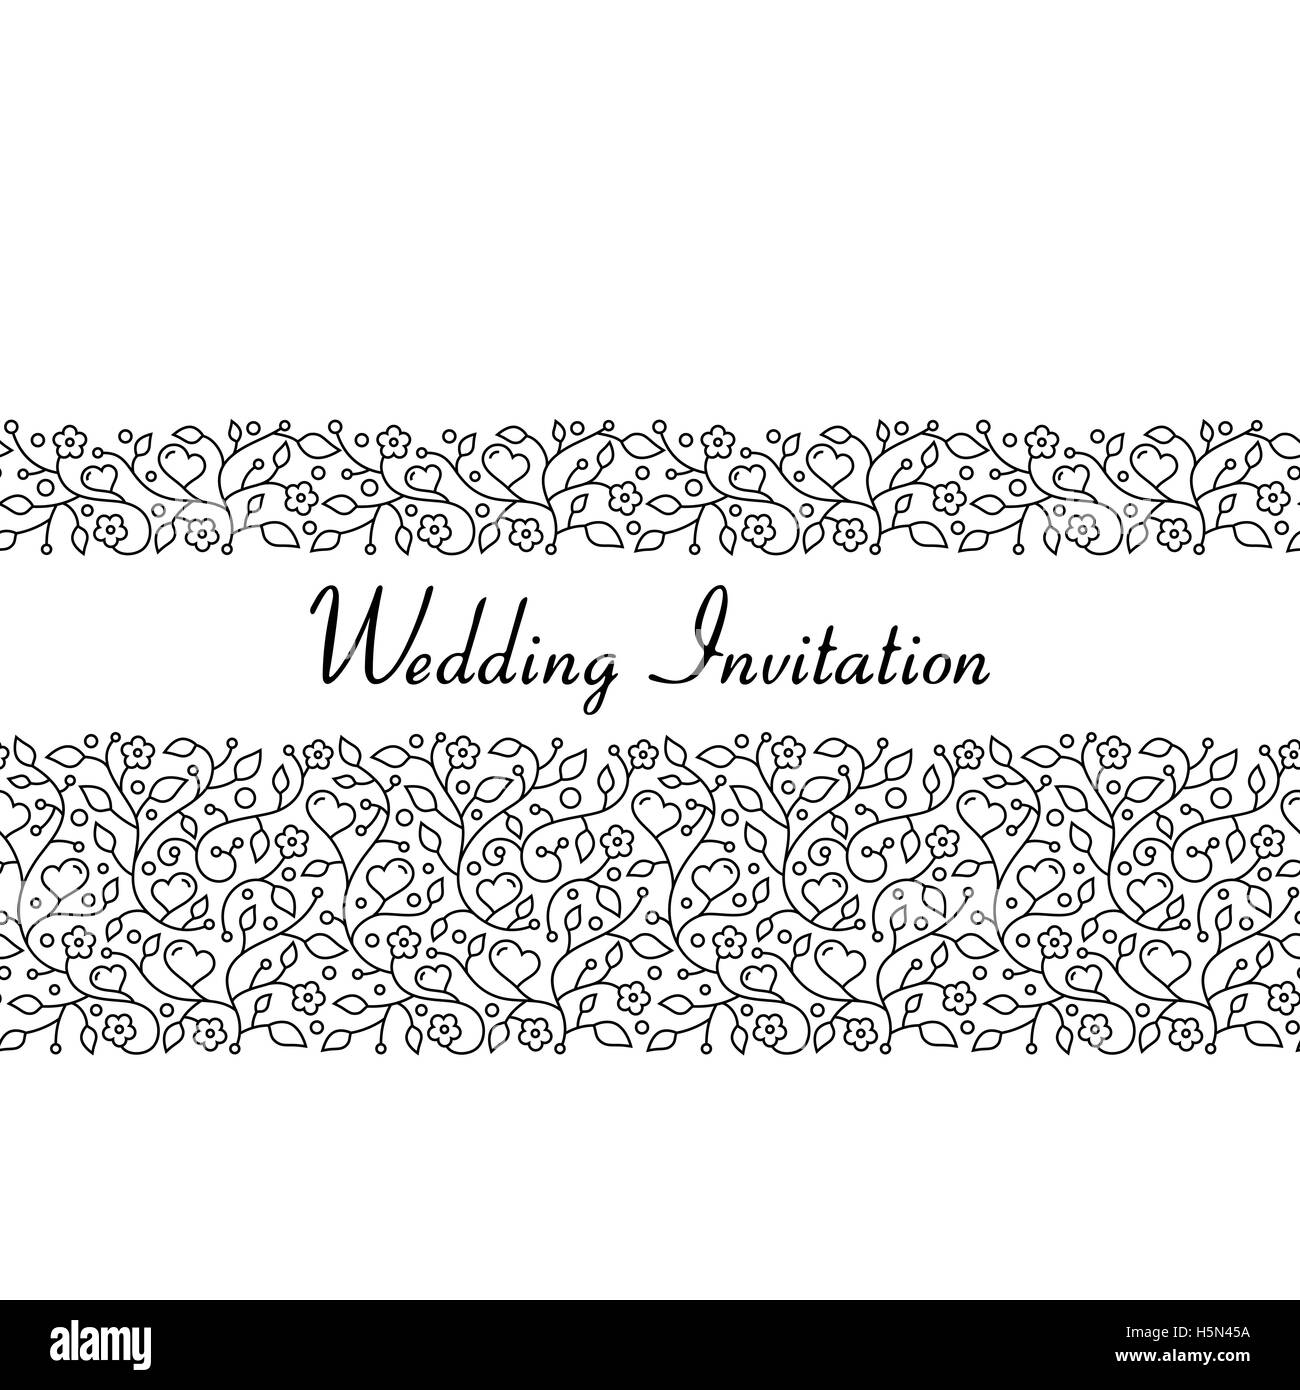 Vector illustration of ornamental floral seamless pattern with flowers, leaves and hearts for wedding invitations Stock Vector